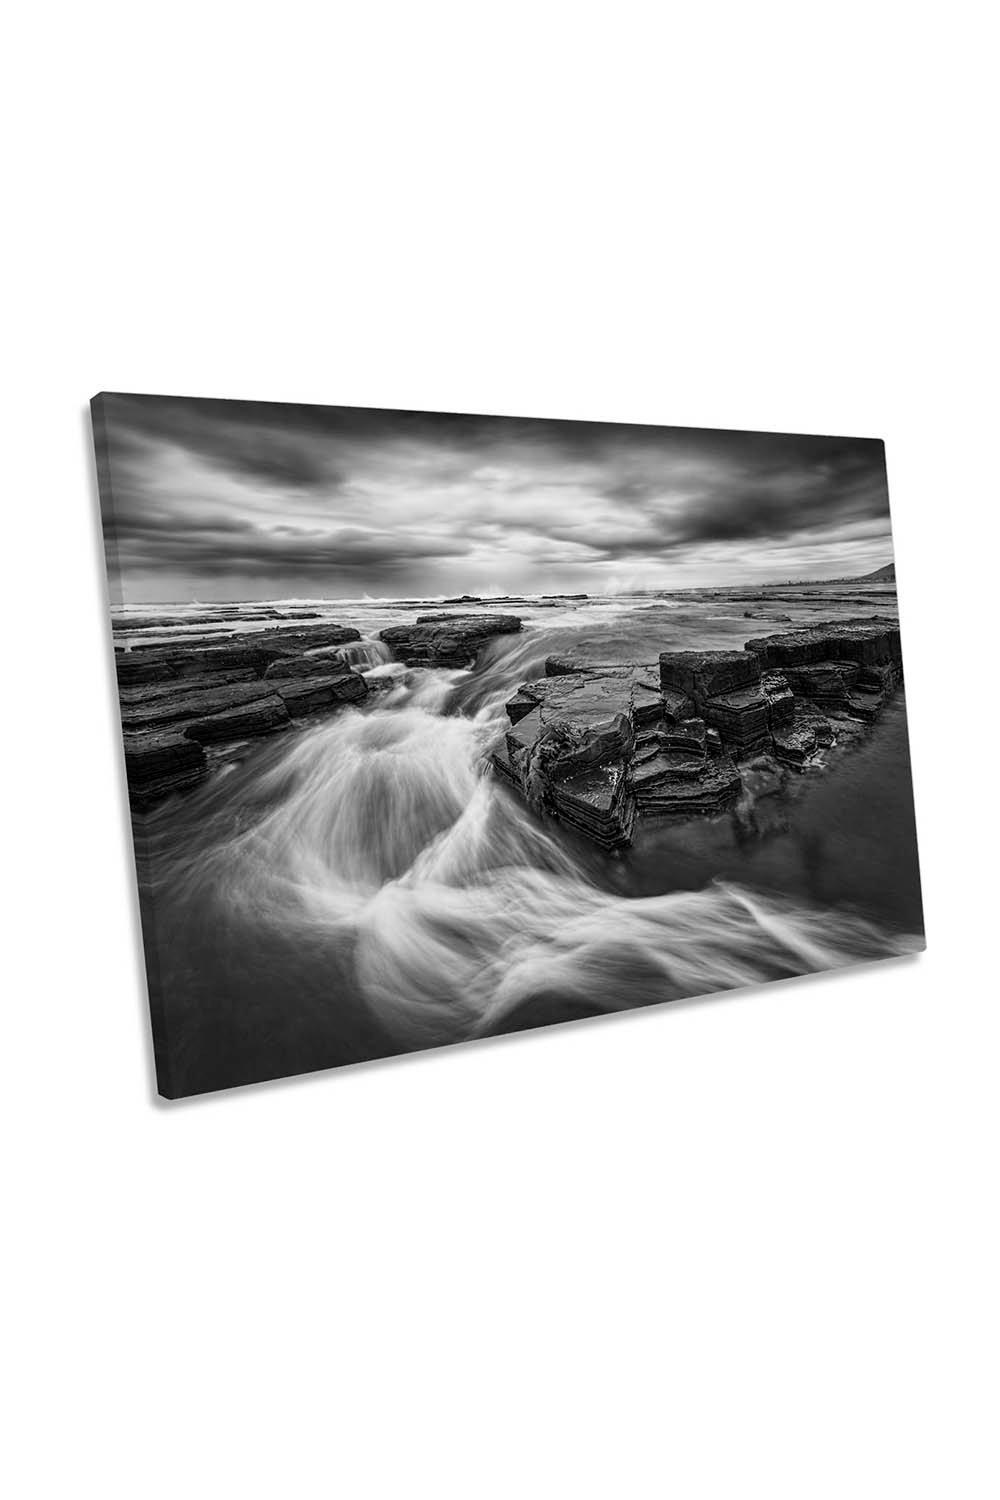 Dance of Water Seascape Black and White Canvas Wall Art Picture Print